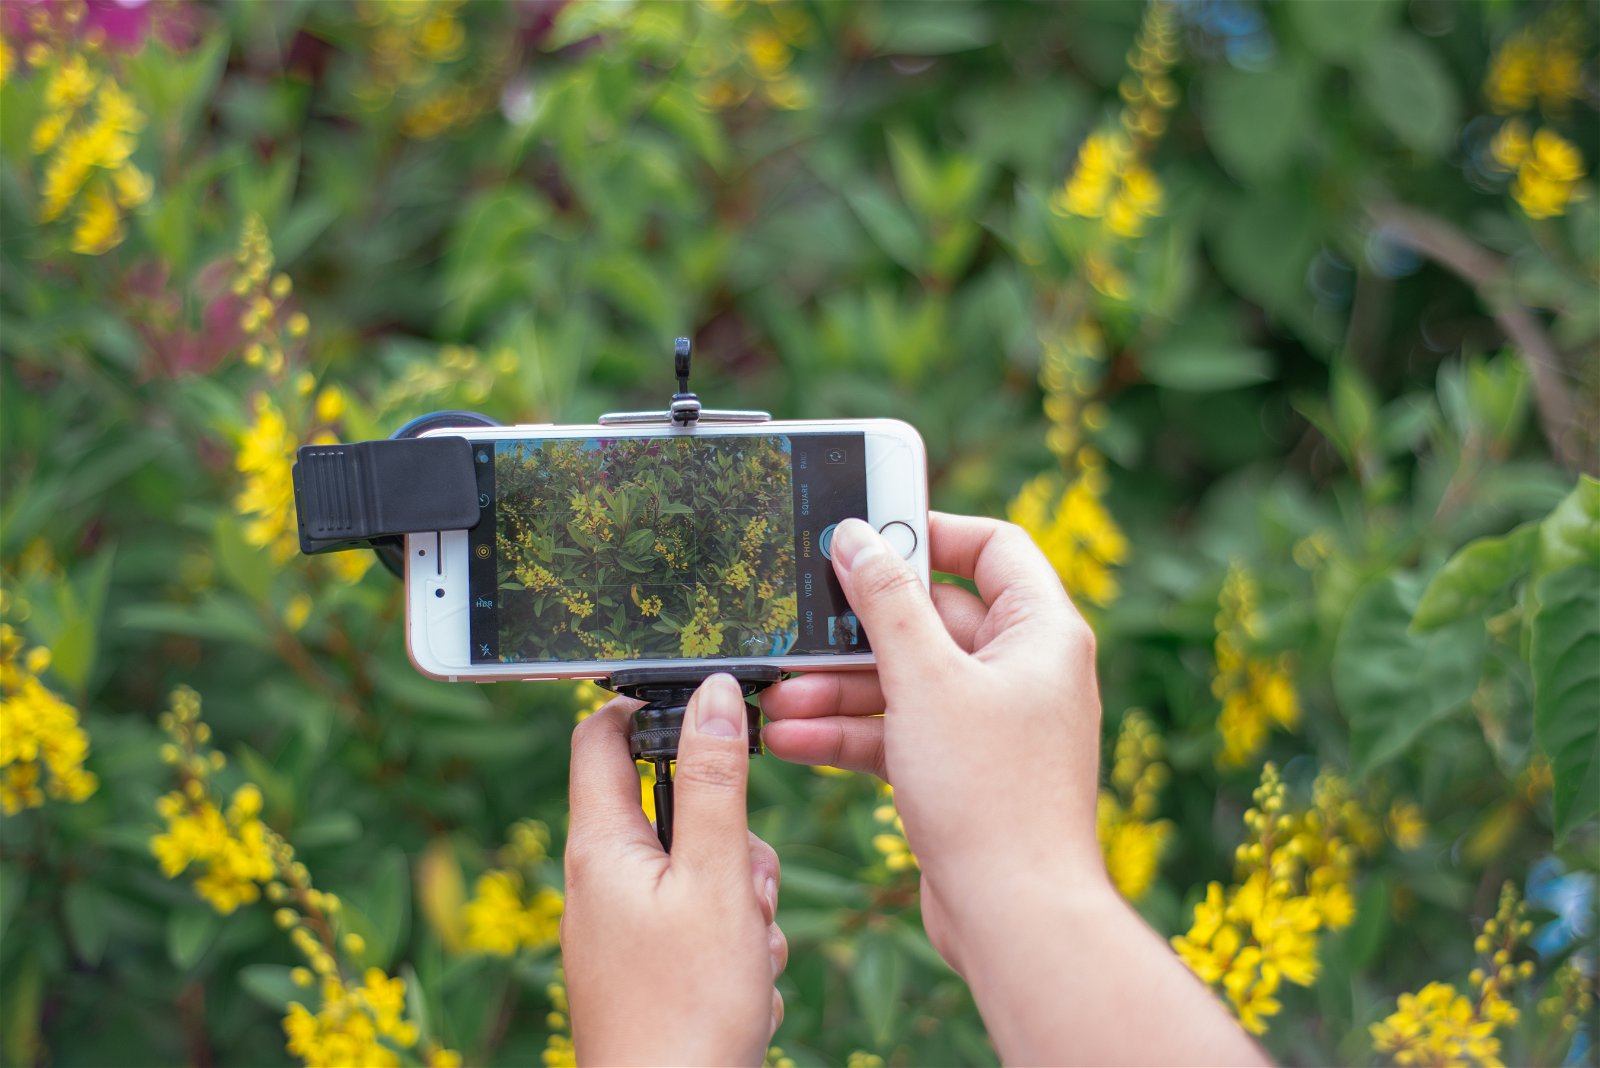 Hands holding up an iPhone attached to a holder to shoot macro photography of yellow flowers and green leaves